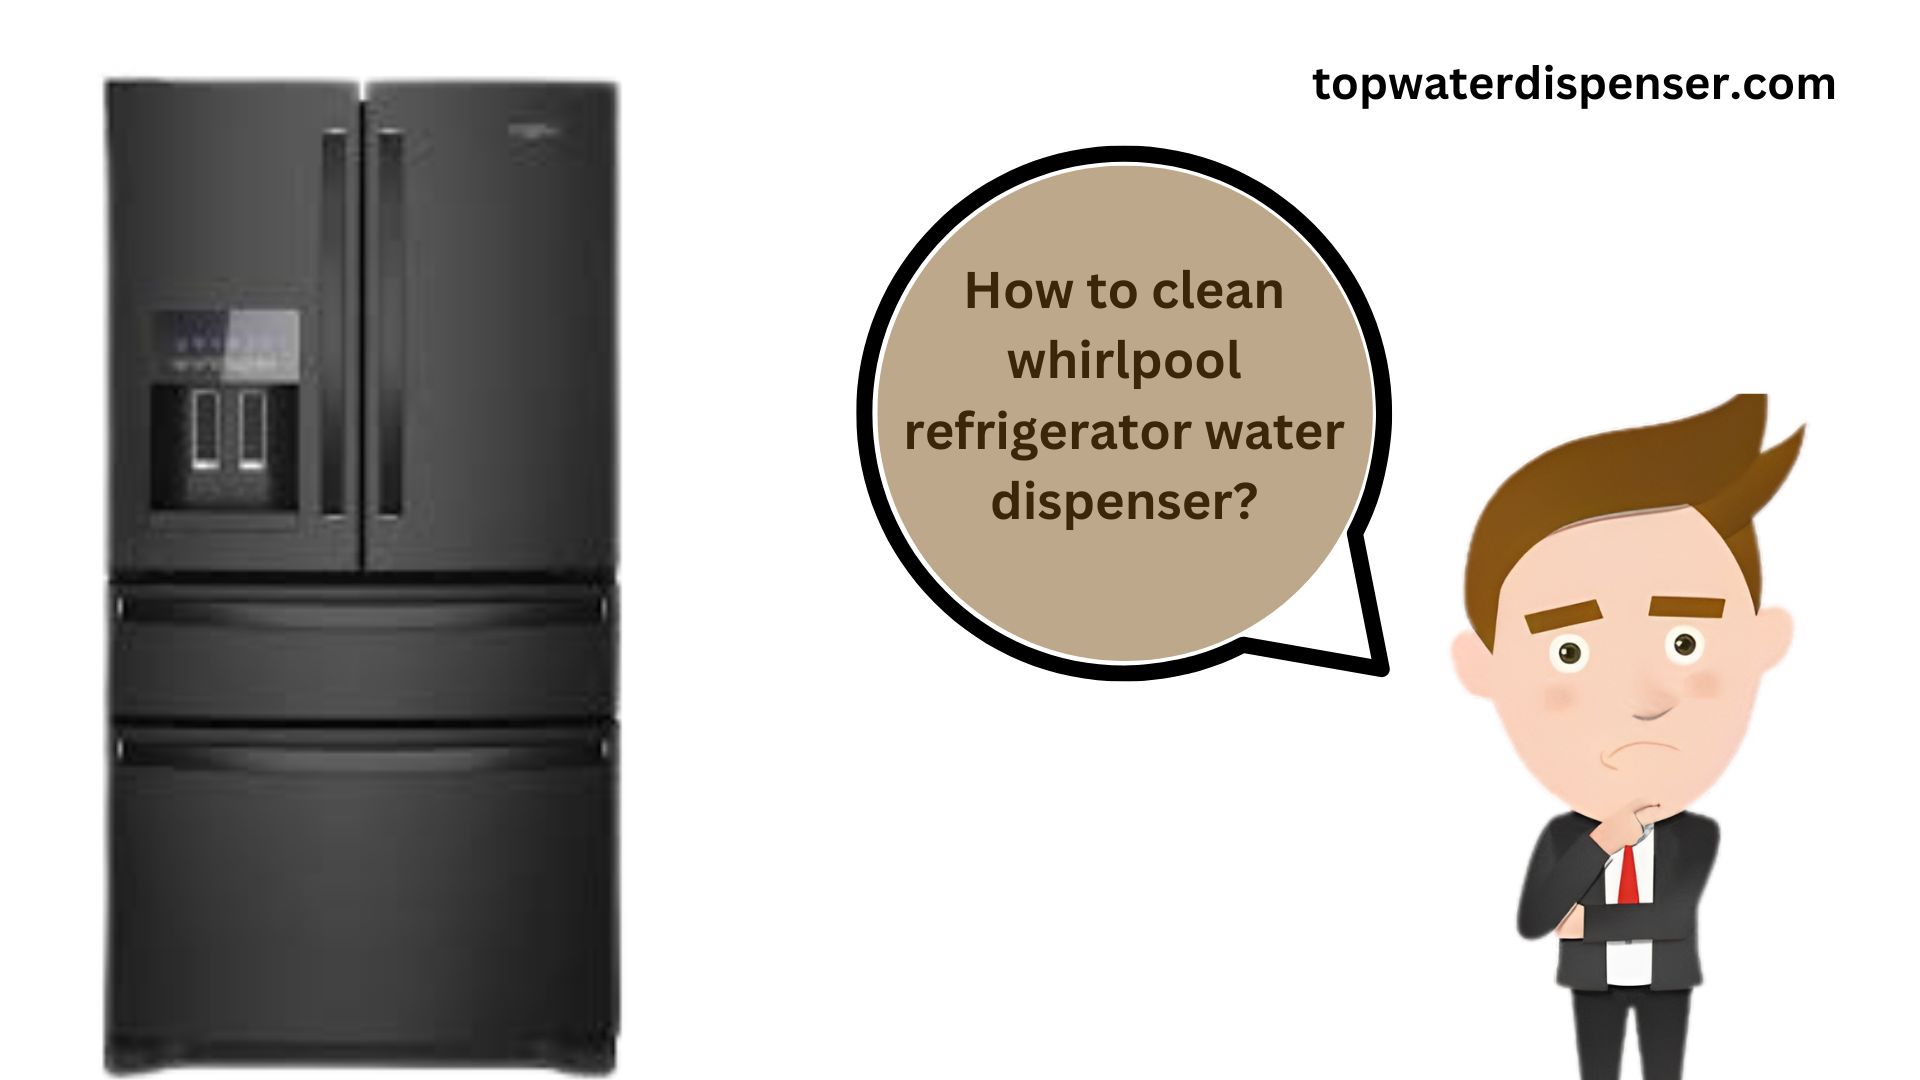 How to clean whirlpool refrigerator water dispenser? 